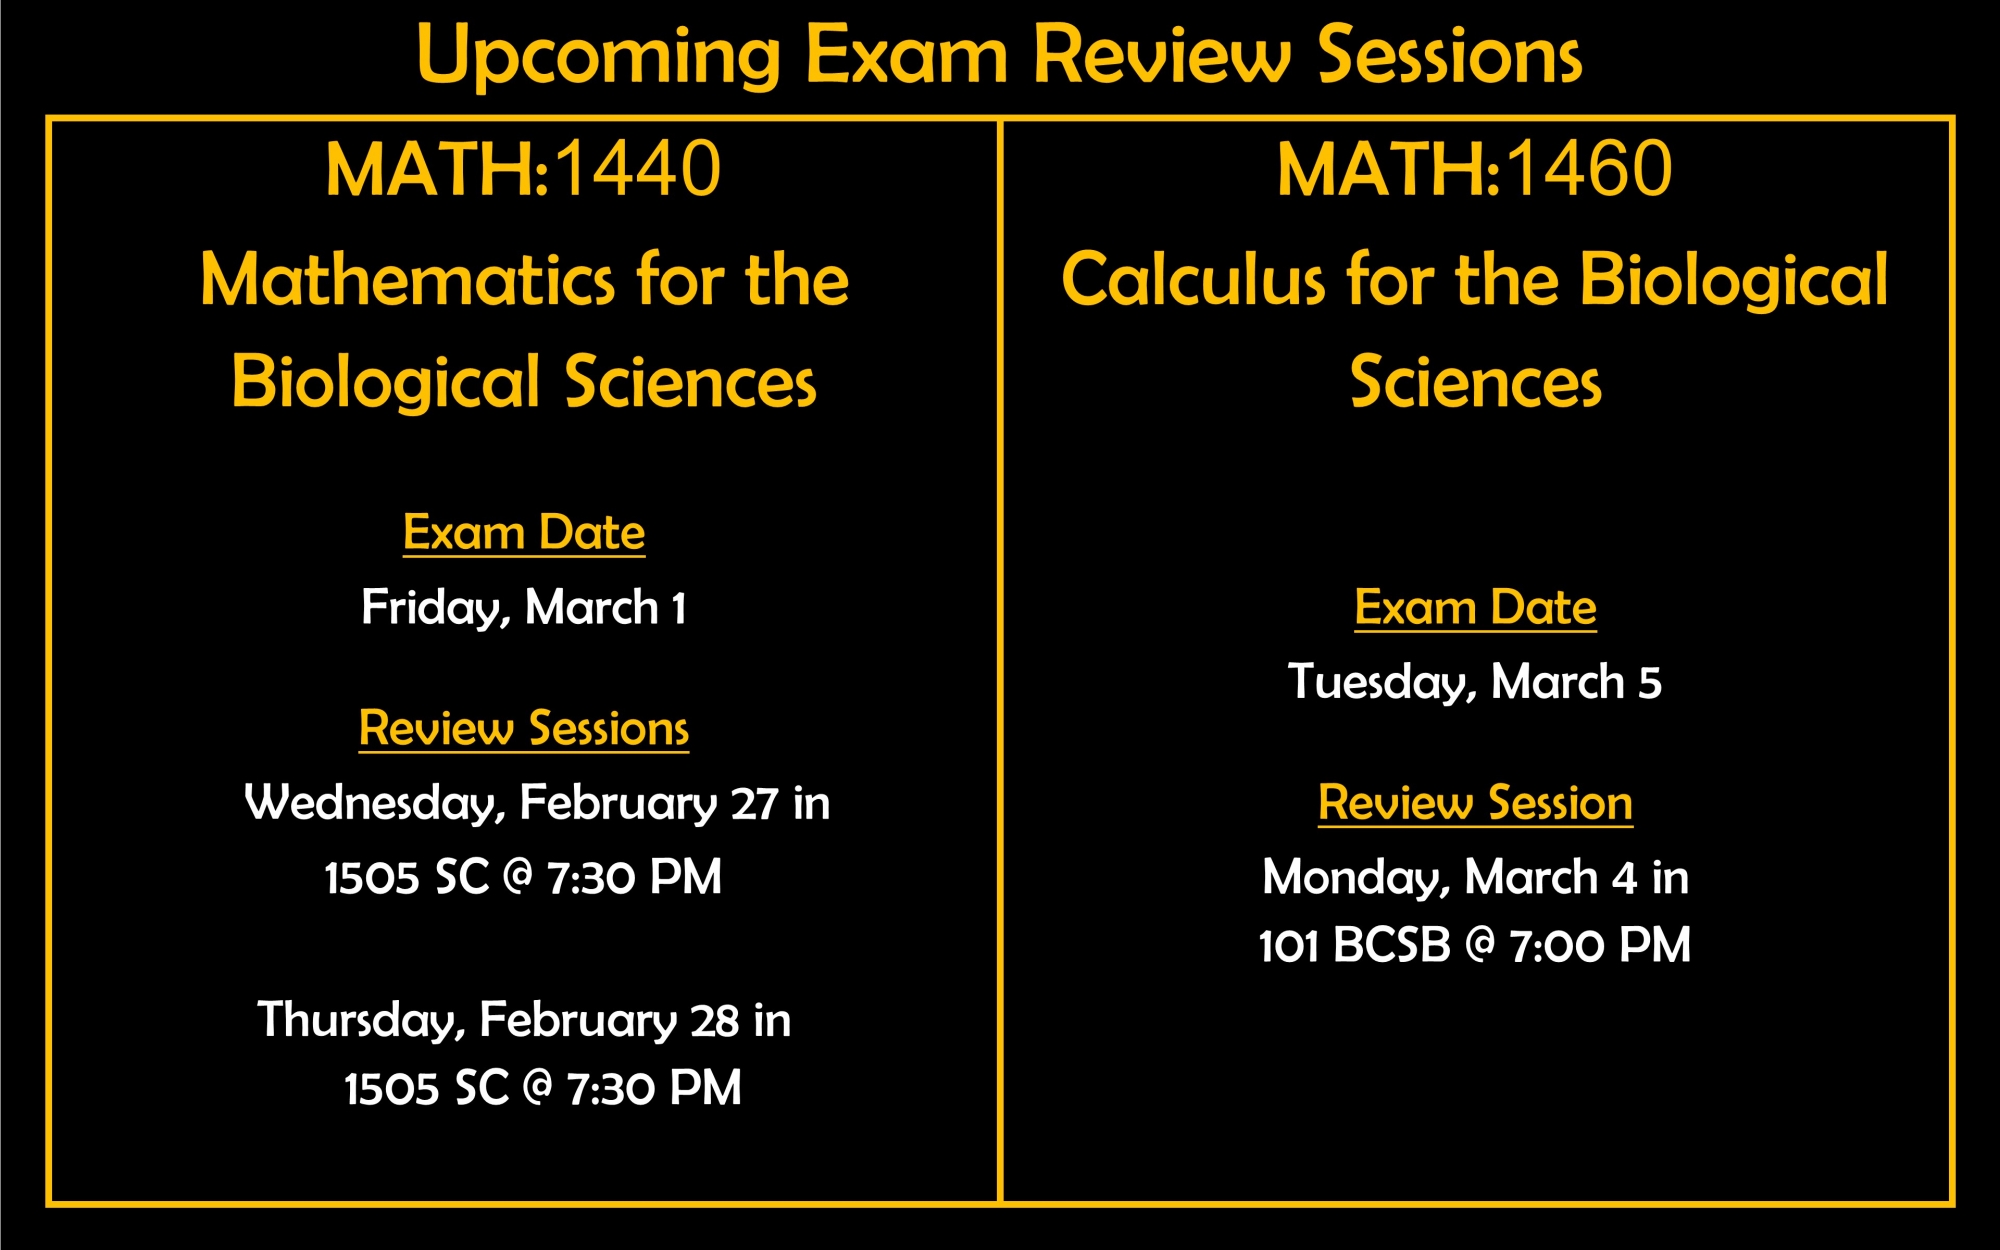 Upcoming Exam Review Sessions MATH:1440 Mathematics for the Biological Sciences Exam Date Friday, March 1 Review Sessions Wednesday in 1505 SC @ 7:30 PM Thursday in 1505 SC @ 7:30 PM MATH:1460 Calculus for the Biological Sciences Exam Date Tuesday, March 5 Review Session Monday in 101 BCSB @ 7:00 PM